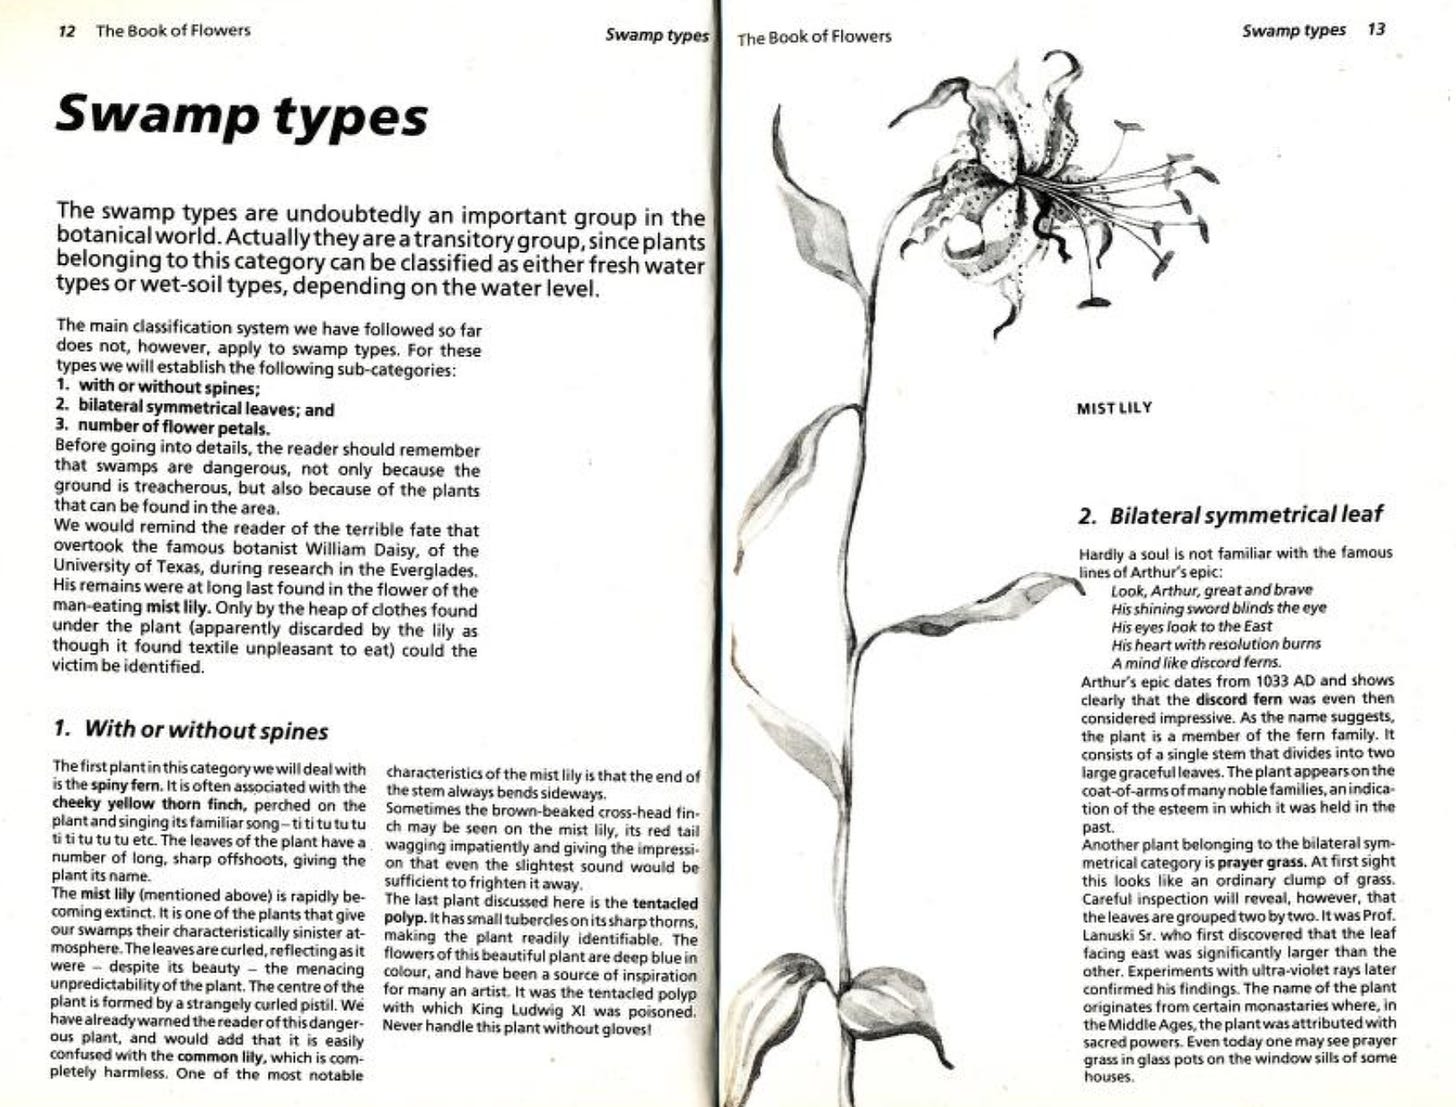 Book page from "The Antagonists," showing a section from The Book Of Flowers. A header "Swamp Types" gives an introduction to a series of fictional swamp plants, with two subheadings "With or without spines" and "Bilateral symmetrical leaf" visible, along with a pencil sketch illustration of a plant called a Mist Lily.